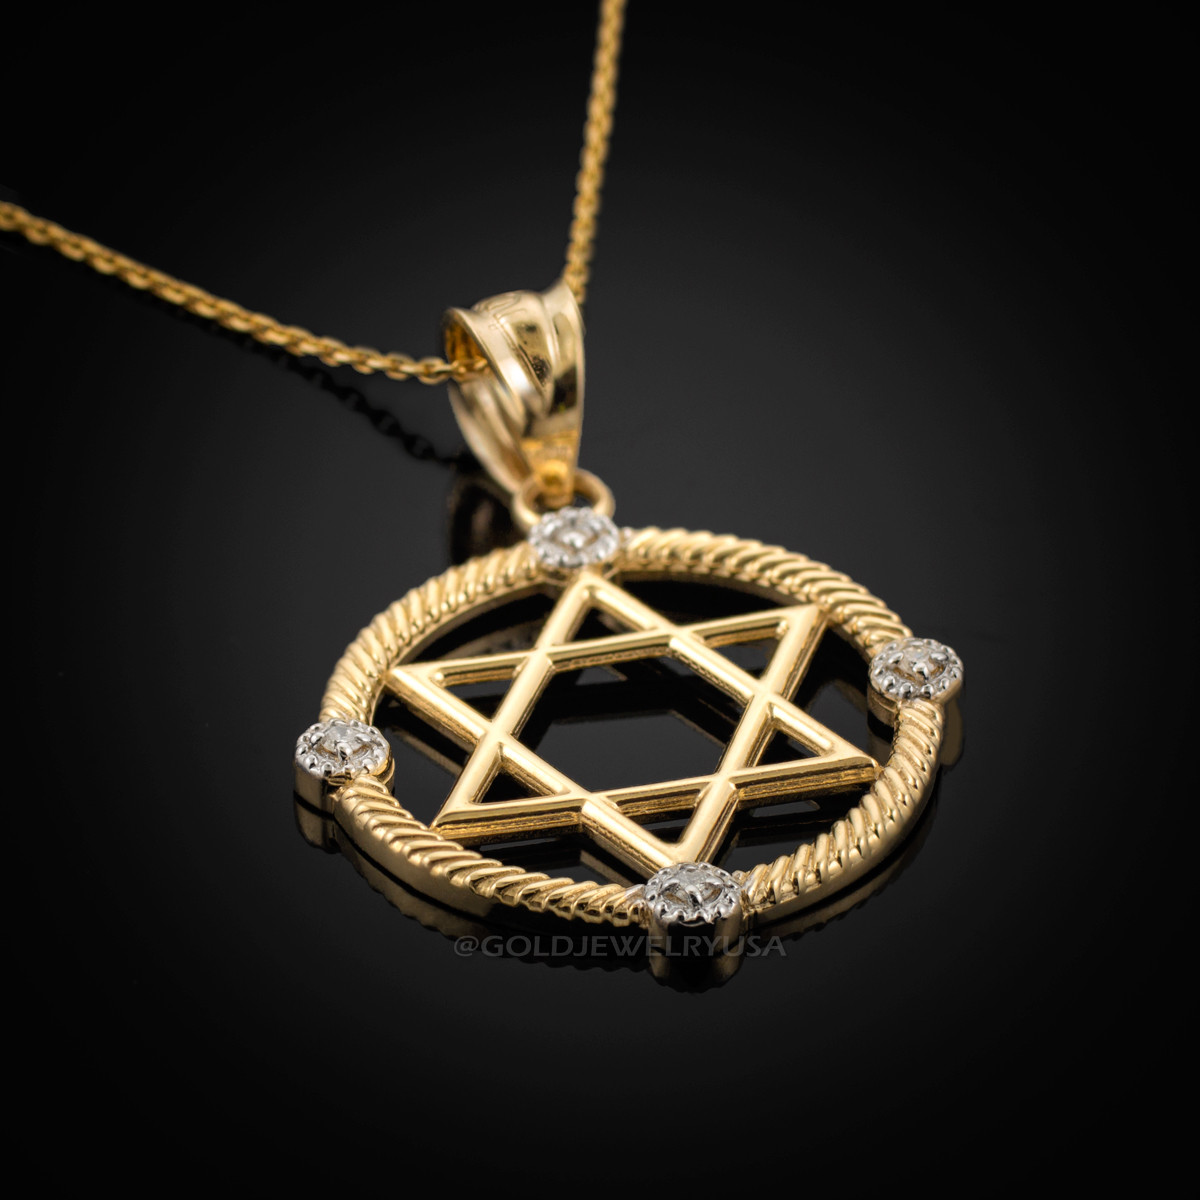 Diamond Pendant with Jewish Star of David in 14K Yellow Gold, White Gold or Rose Gold Rose Gold / 16 Chain